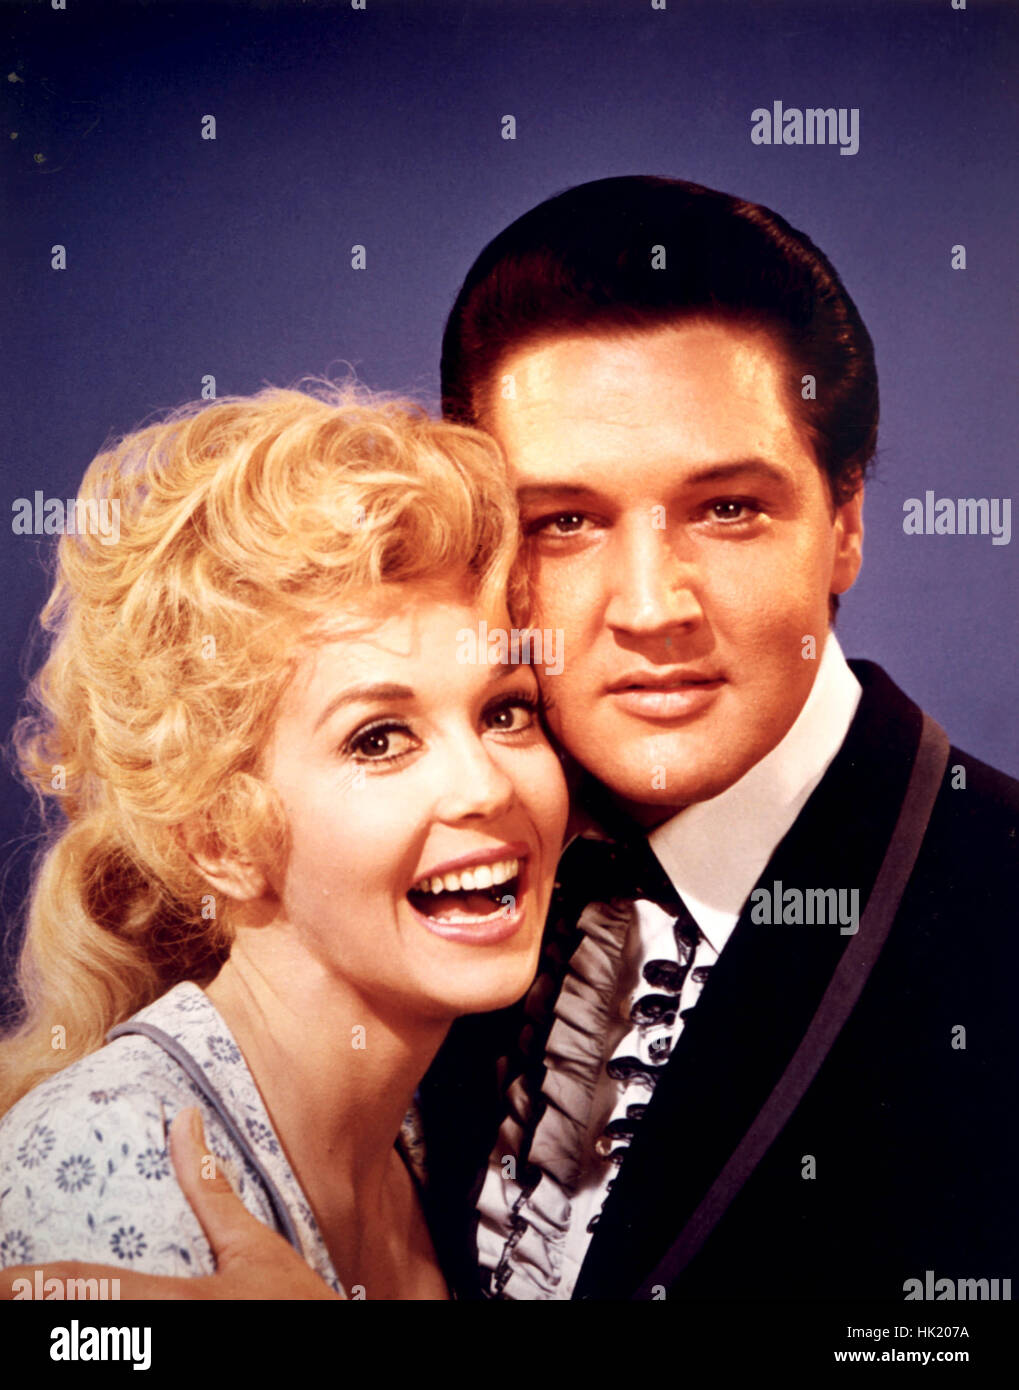 Hollywood, USA. 1st Jan, 2015. 01 January 2015 - Donna Douglas Dies at 81. FILE PHOTO: Donna Douglas and Elvis Presley. Photo Credit: Credit: Moviestore Collection/face to face/AdMedia Credit: Moviestore Collection/AdMedia/ZUMA Wire/Alamy Live News Stock Photo